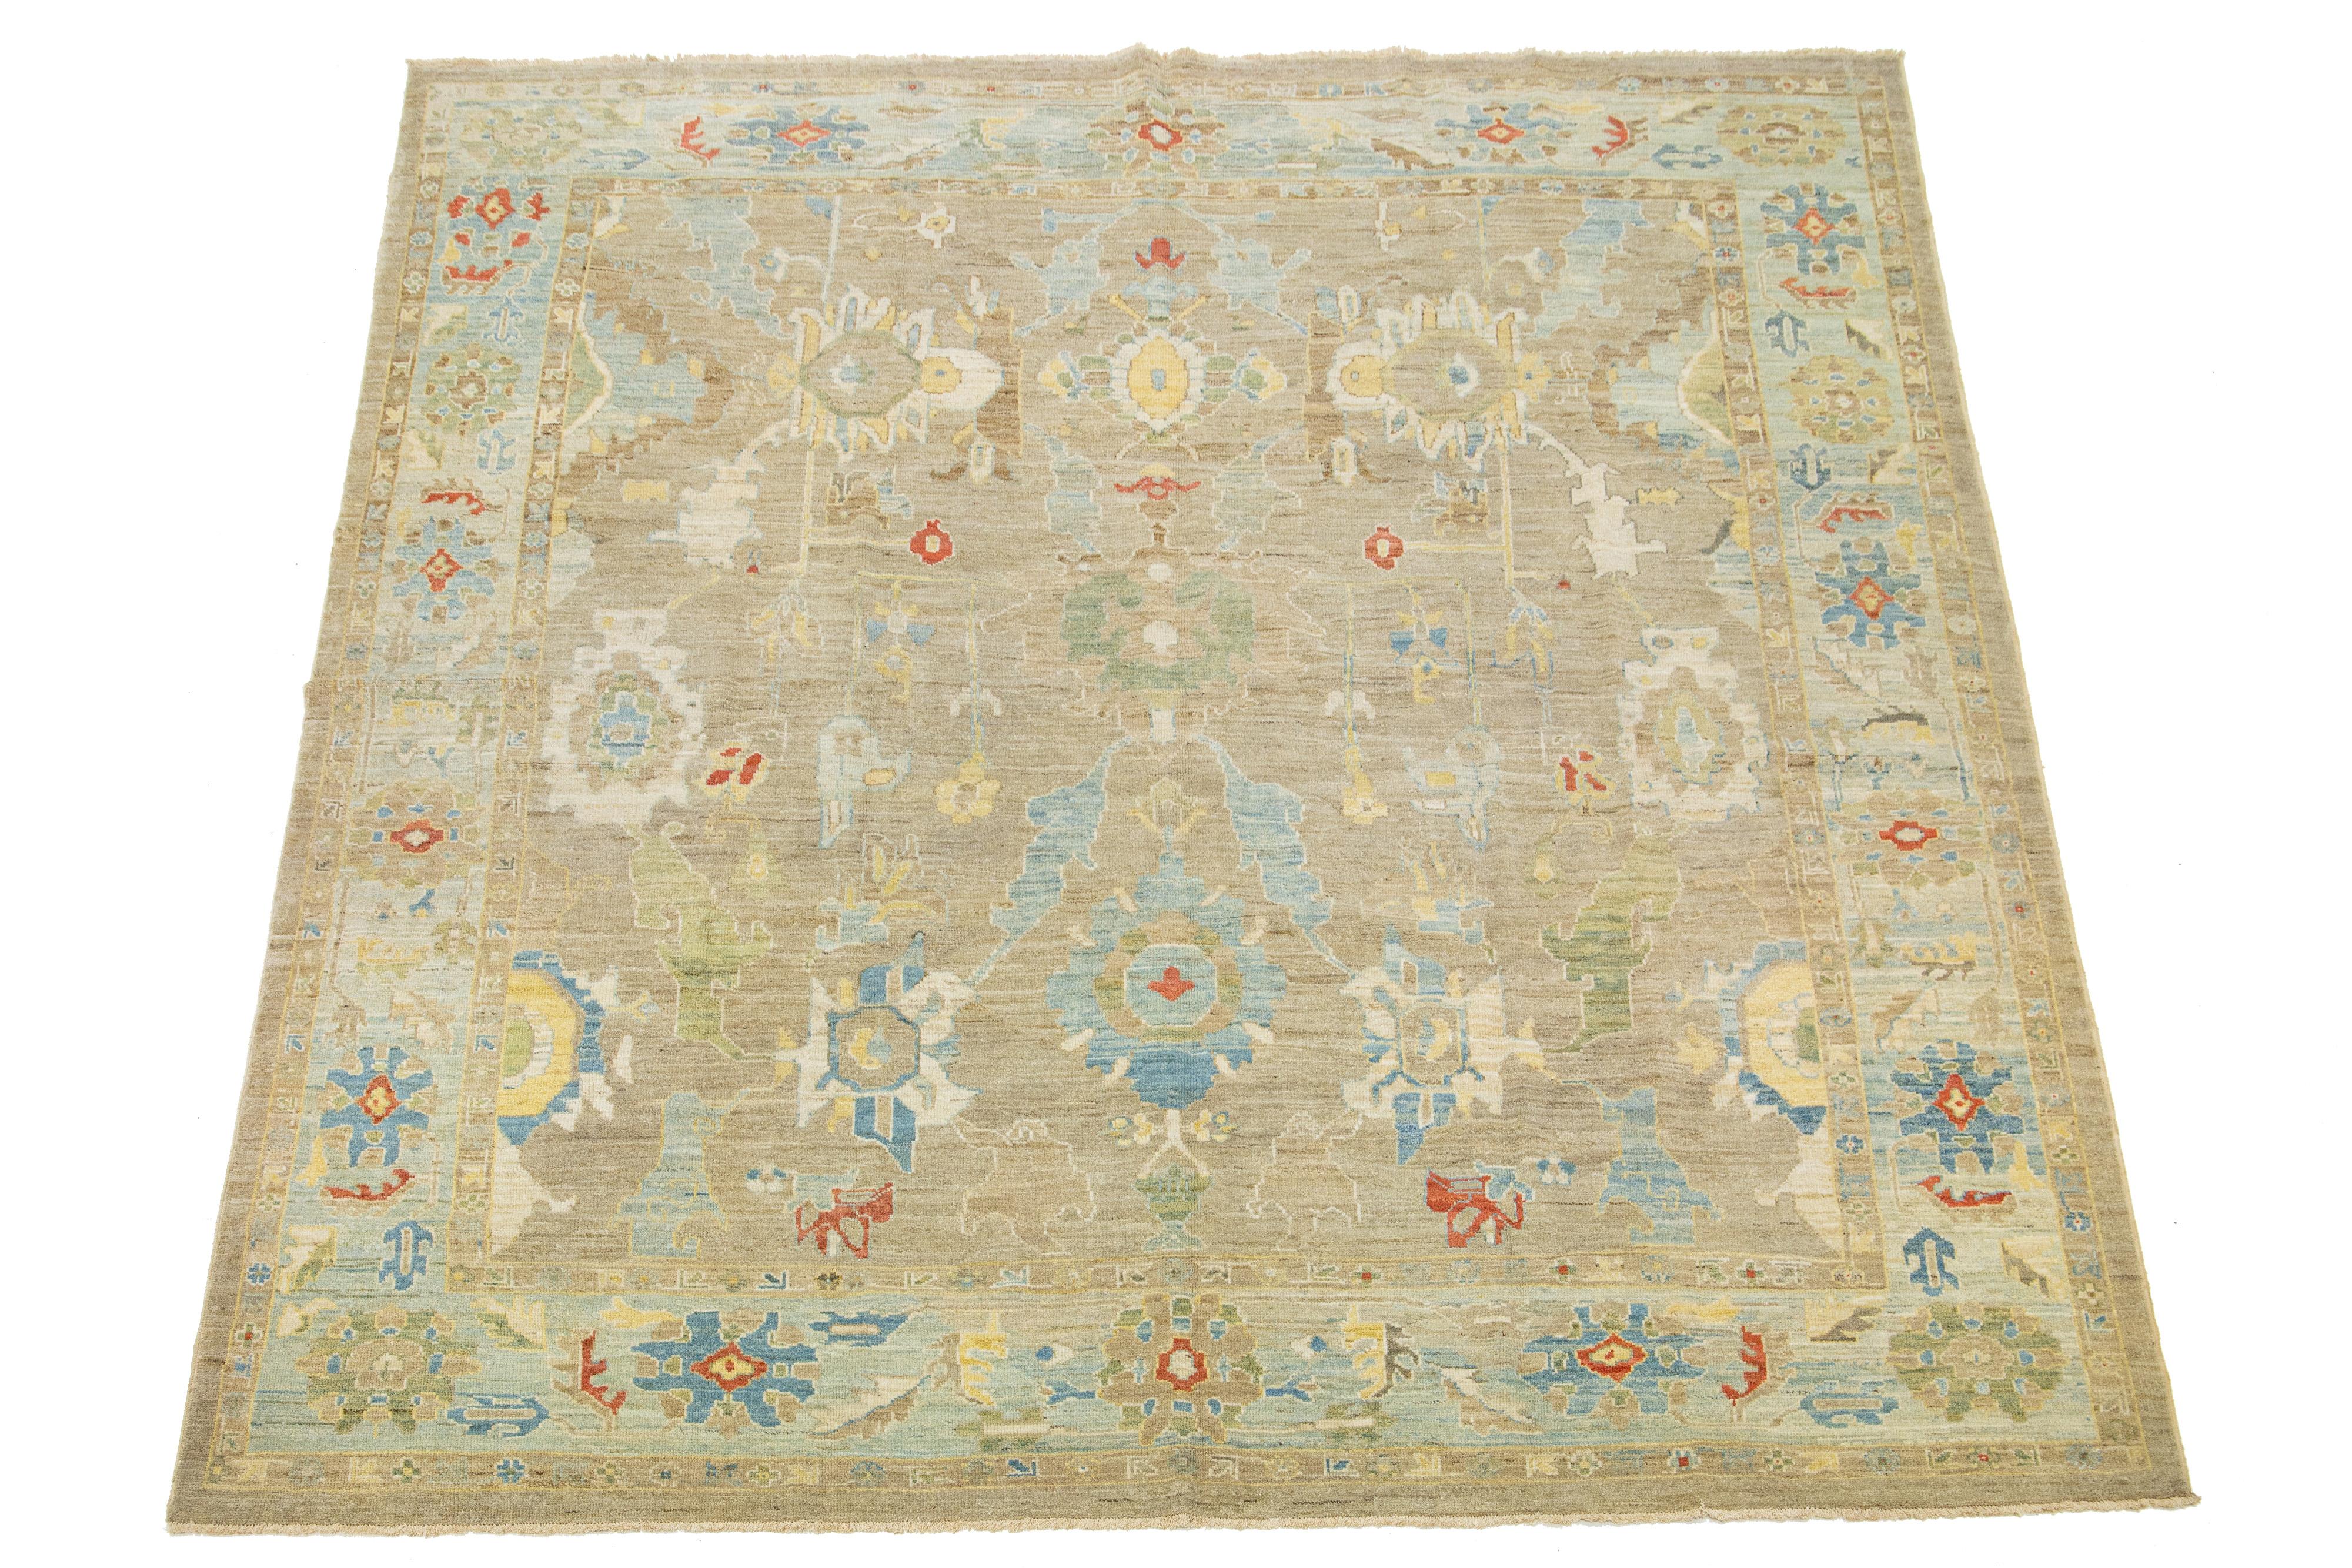 Beautiful Square Sultanabad hand-knotted wool rug with a light brown field. This Sultanabad rug has a blue frame and multicolor accents in a gorgeous classic floral design.

This rug measures 10'4